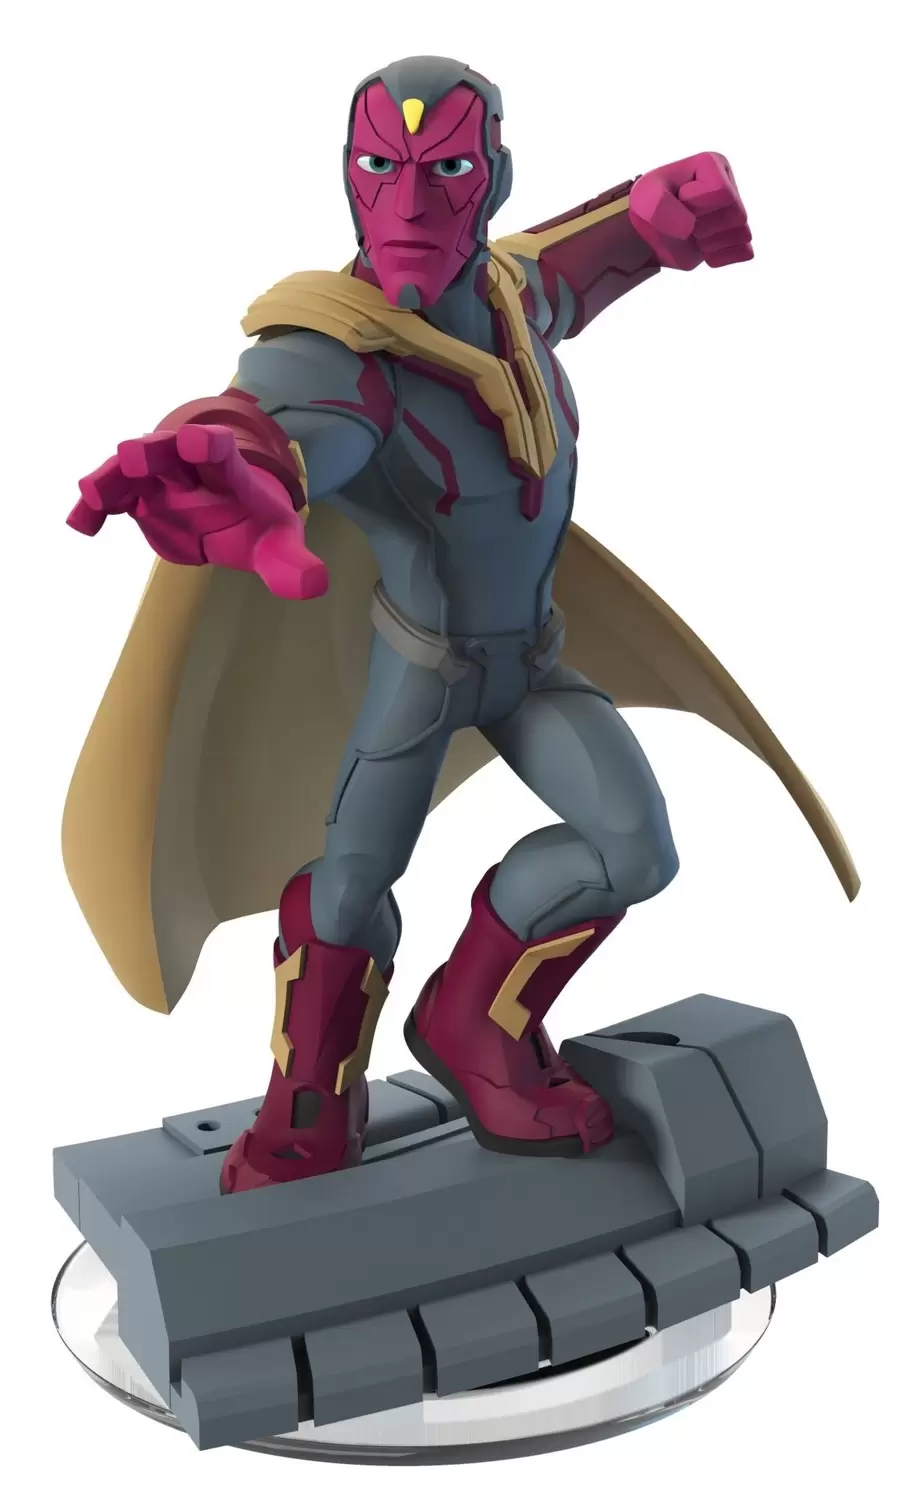 Disney Infinity Action figures - Vision